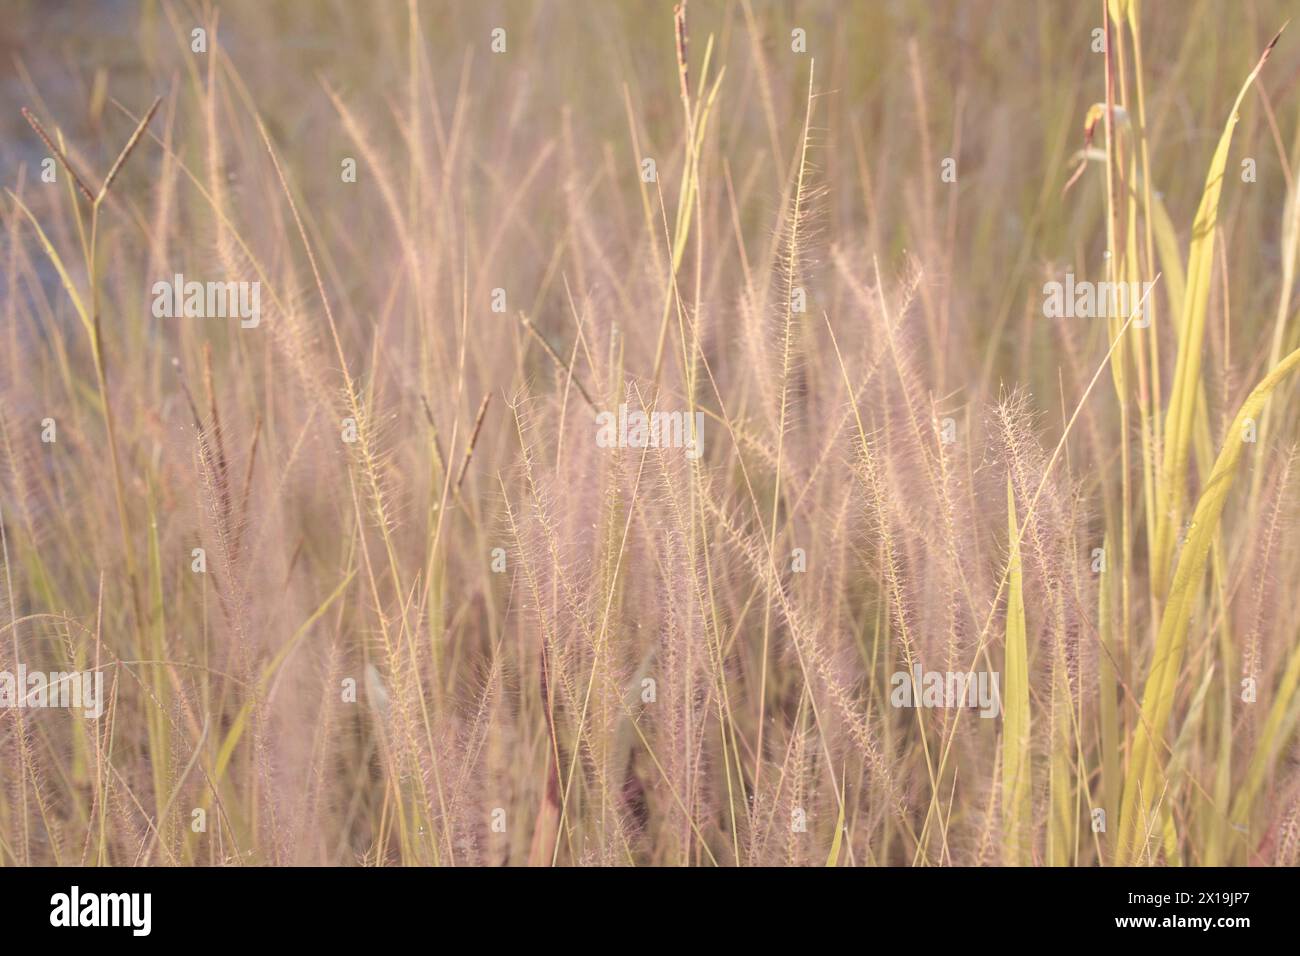 infrared image of bushy pink fountain grass in the wild meadow. Stock Photo